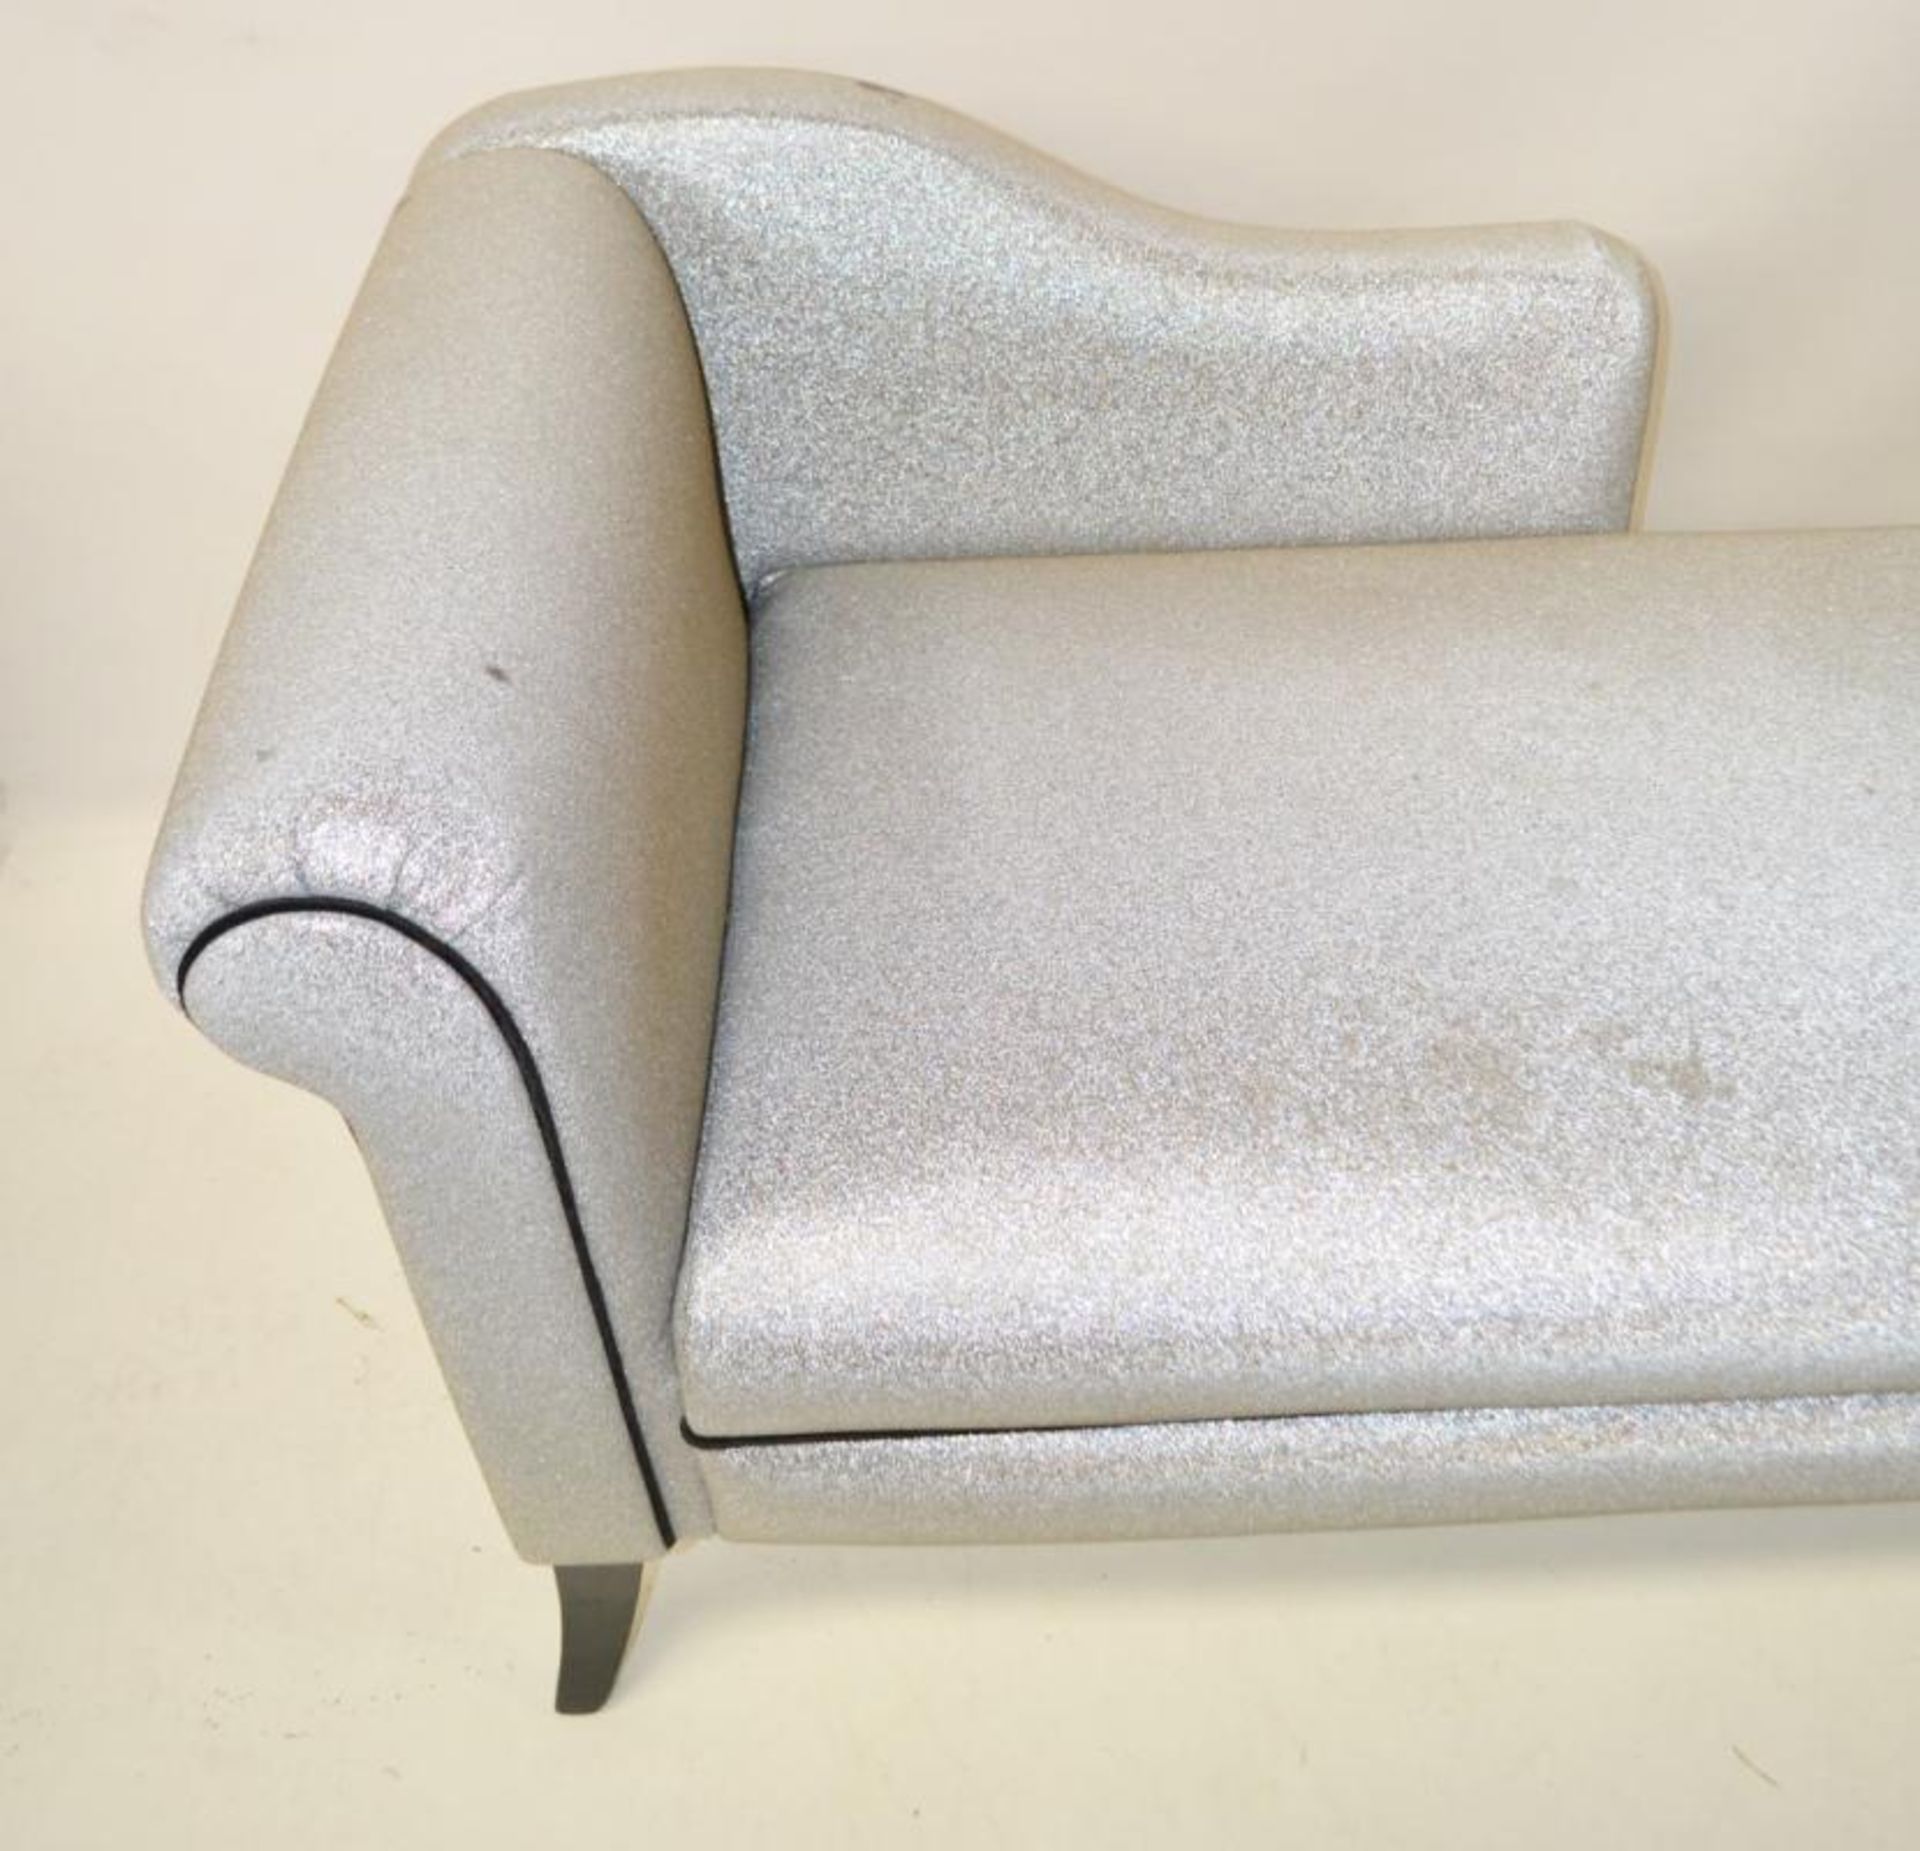 1 x Chaise Lounge Chair Finished In Silver Glitter - Ref: BLT376 - CL380 - NO VAT ON THE HAMMER - - Image 4 of 8